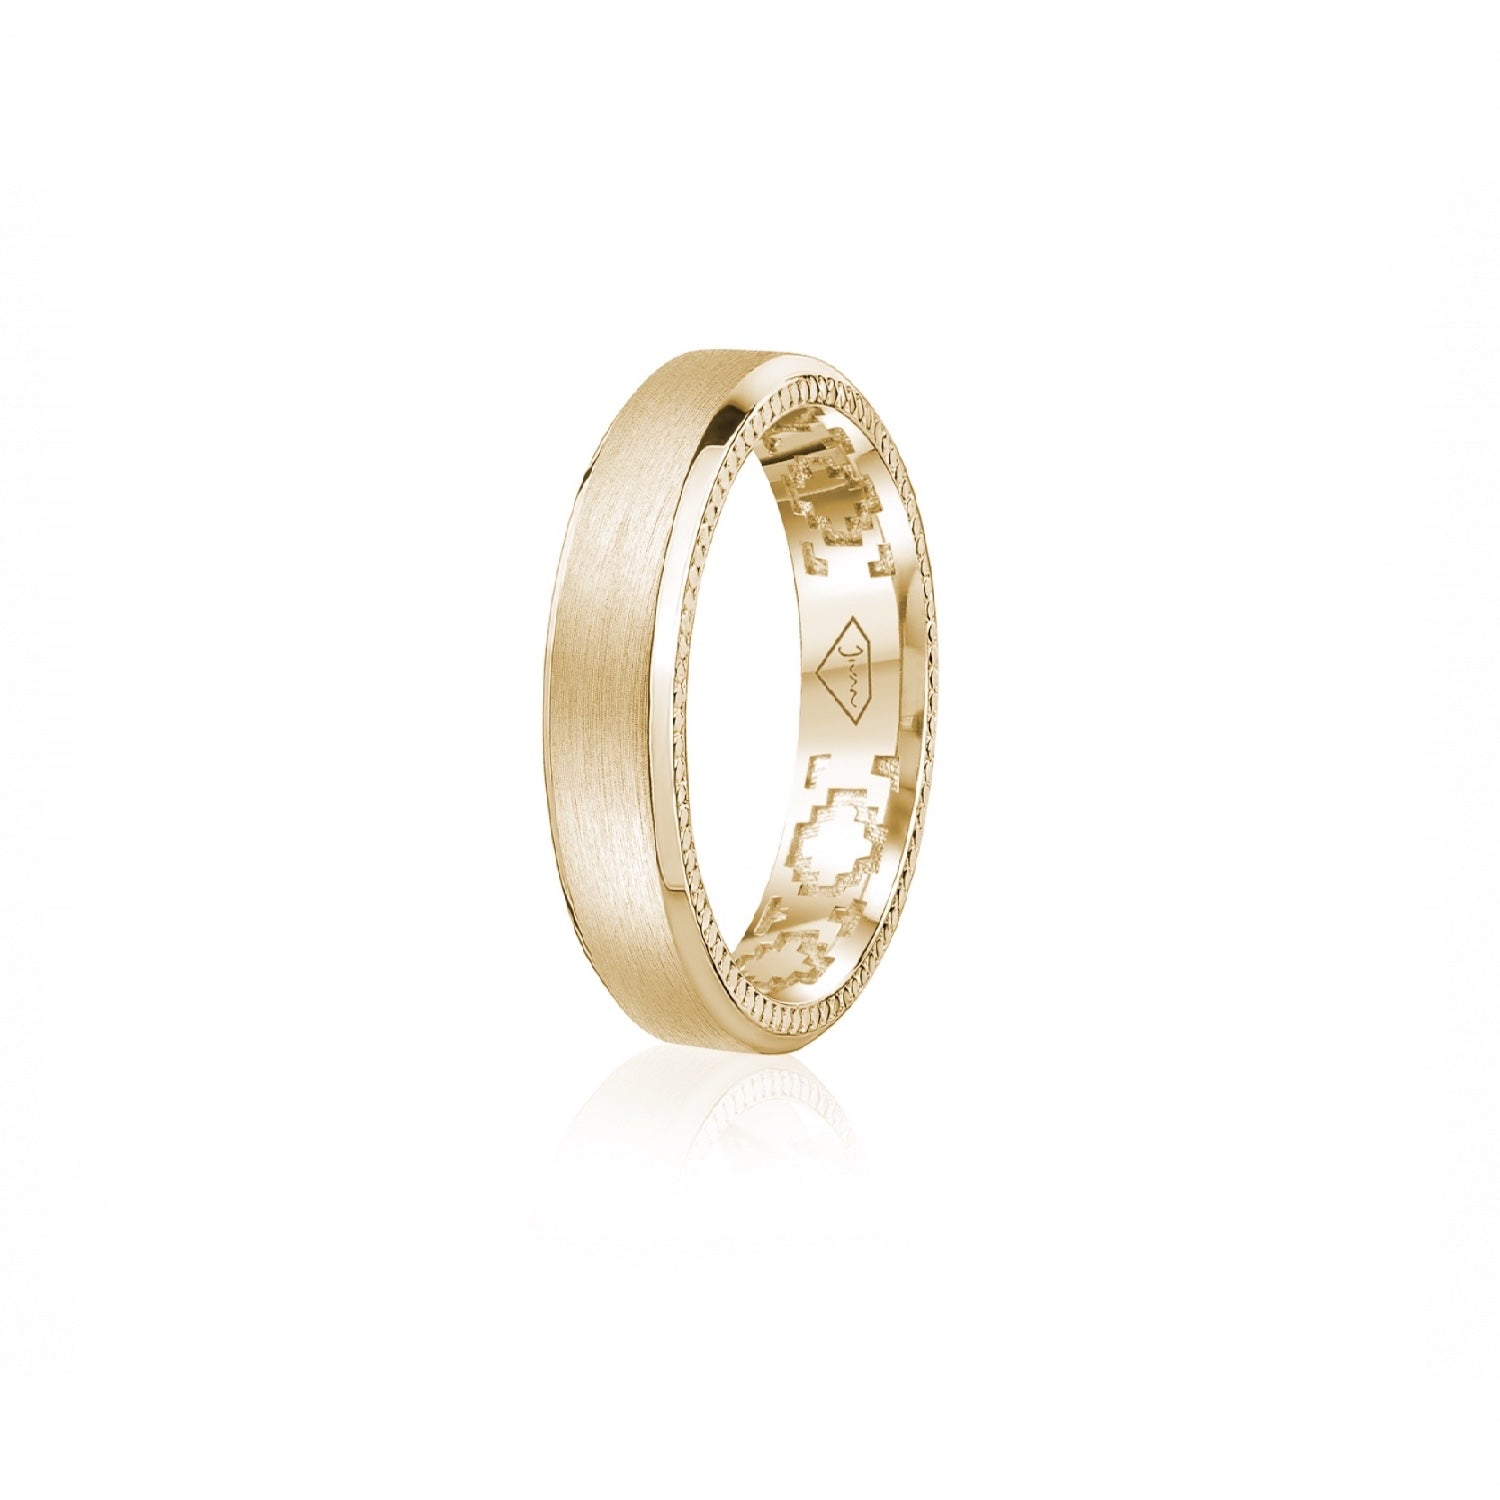 Step Motif Brushed Finish Bevelled Edge 5 mm Wedding Band in Yellow Gold